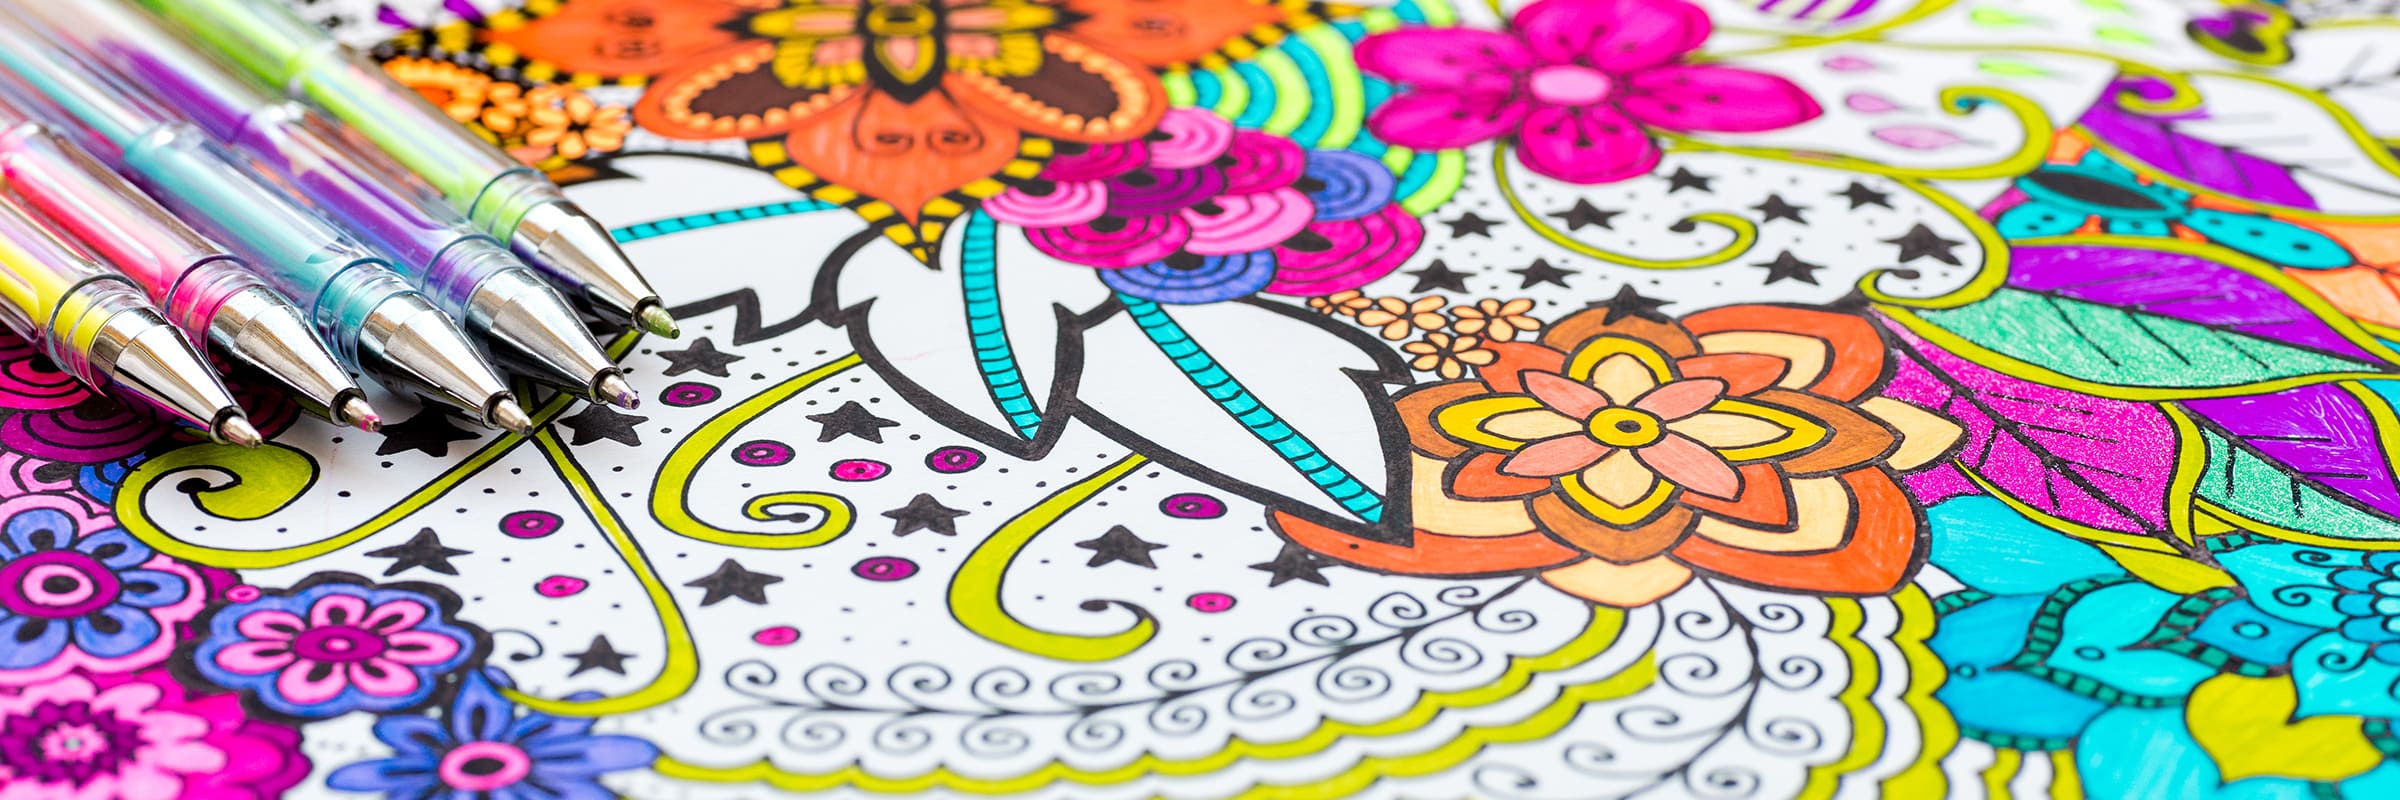 Artist Creates Adult Coloring Books And Sells More Than A Million Copies